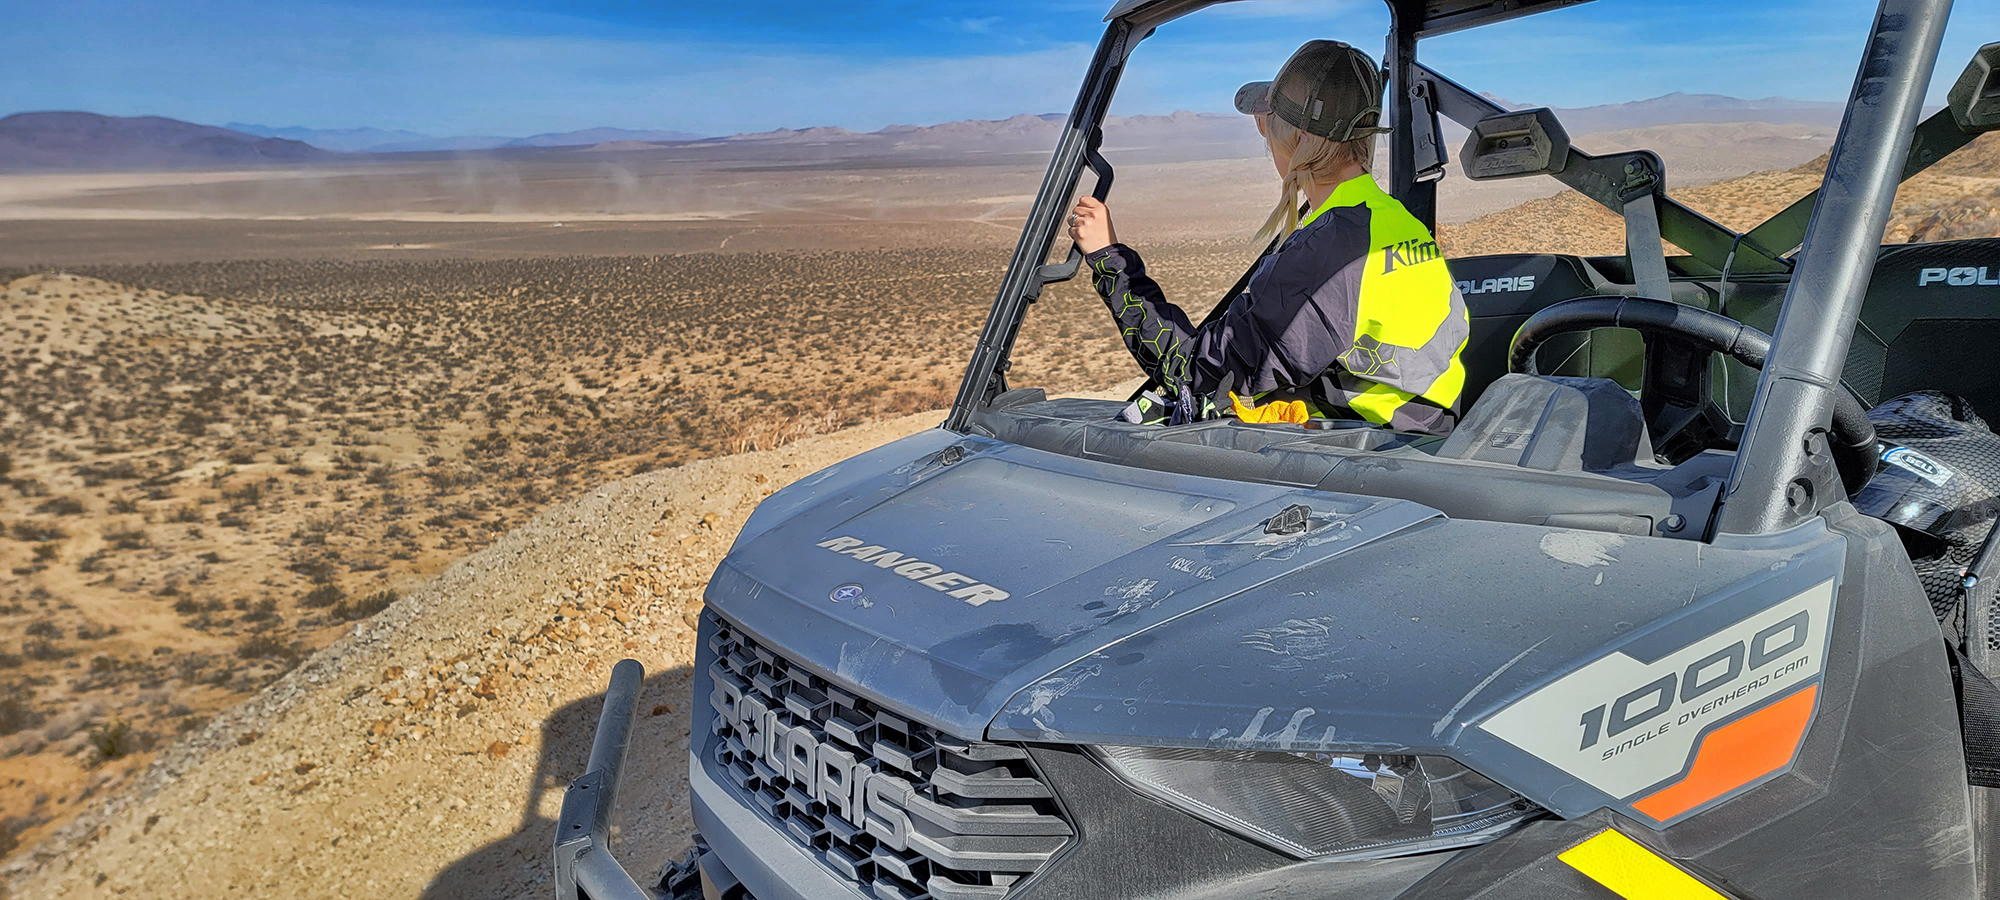 You can explore with ease in the Ranger 1000.